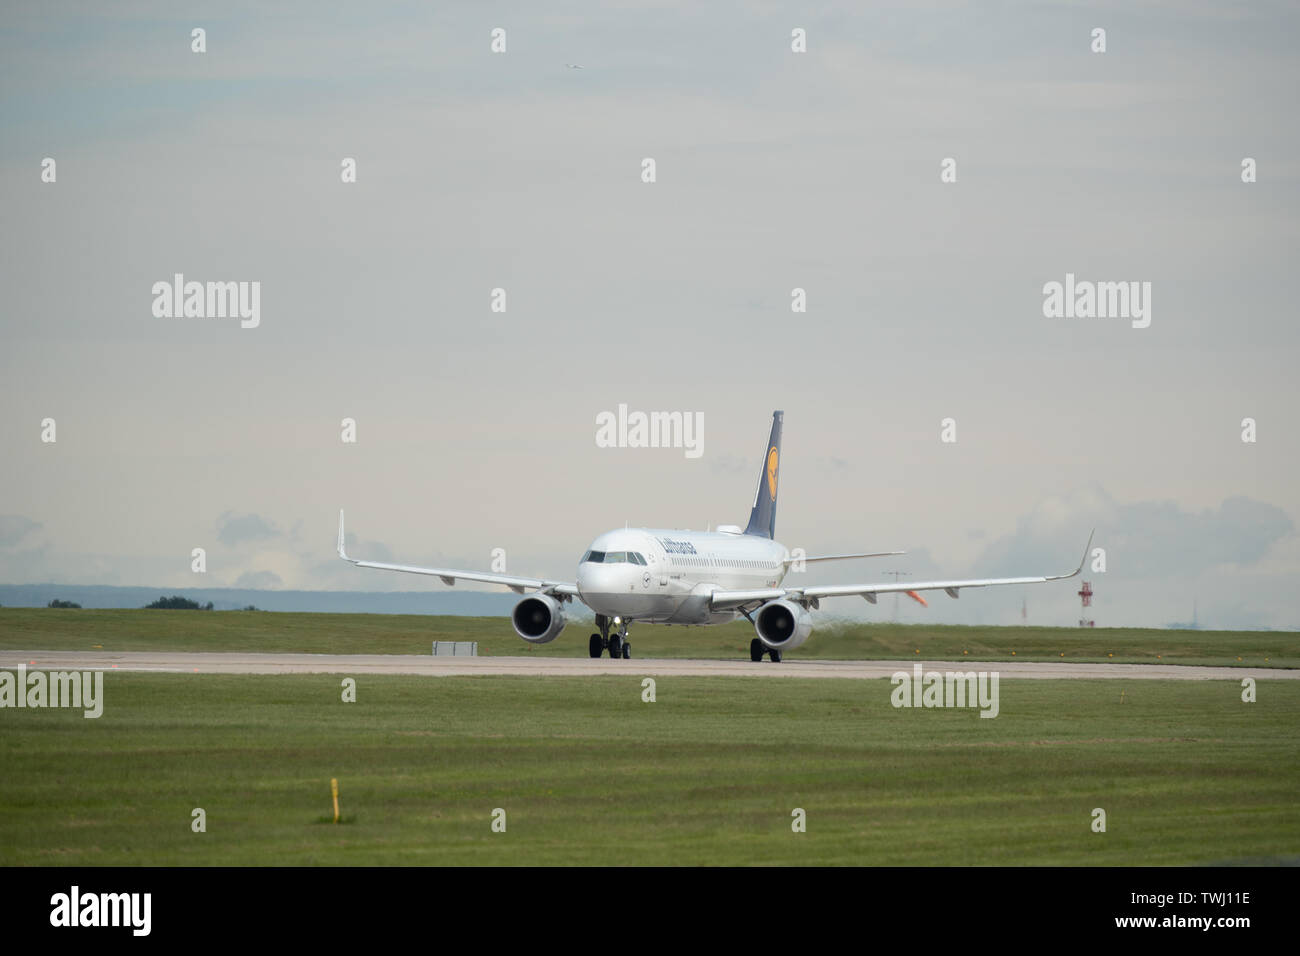 A Lufthansa, also known as Deutsche Lufthansa AG, Airbus A320 prepares for take off from Manchester International Airport in Wilmslow, United Kingdom Stock Photo